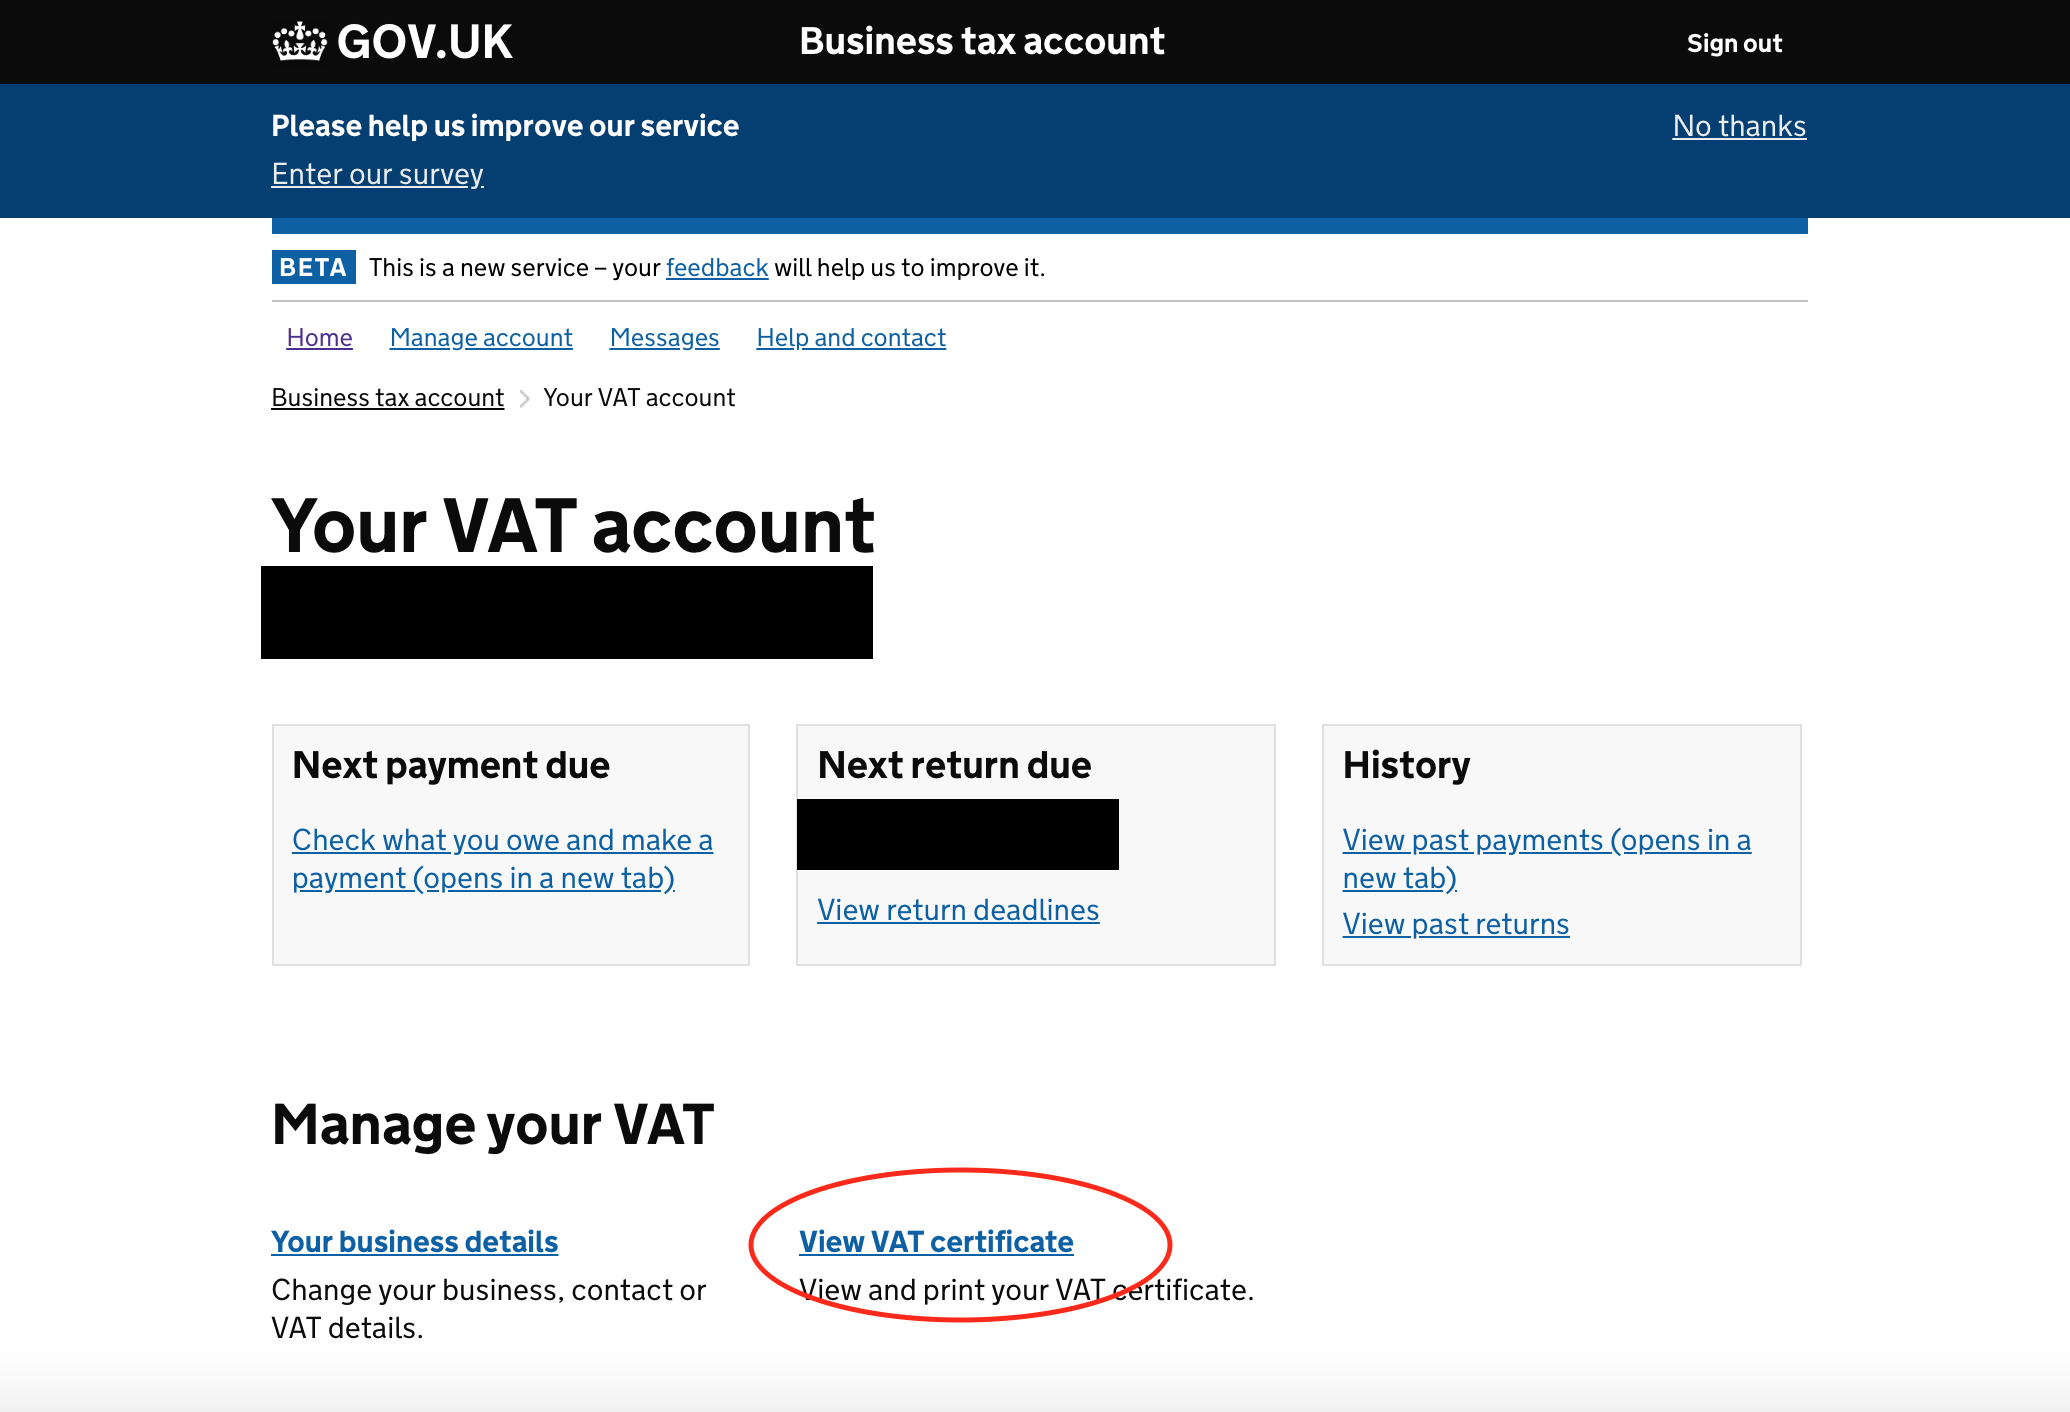 Your VAT account page for viewing VAT certificate